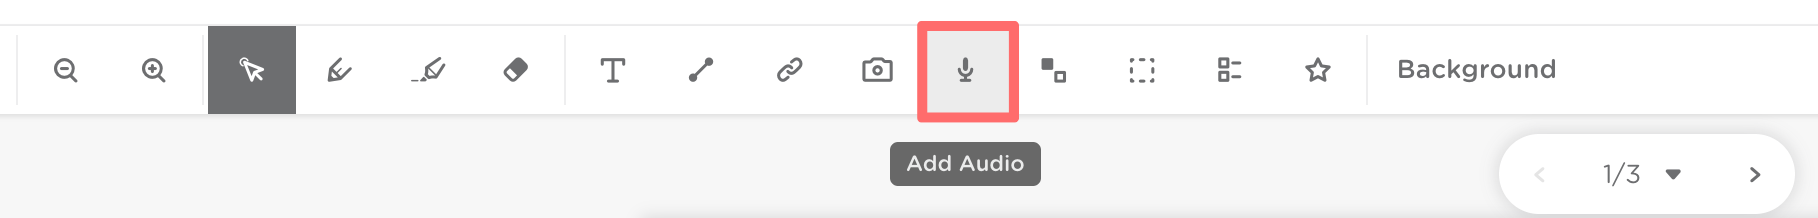 The tool bar on a slide. The add audio icon is outlined in red.